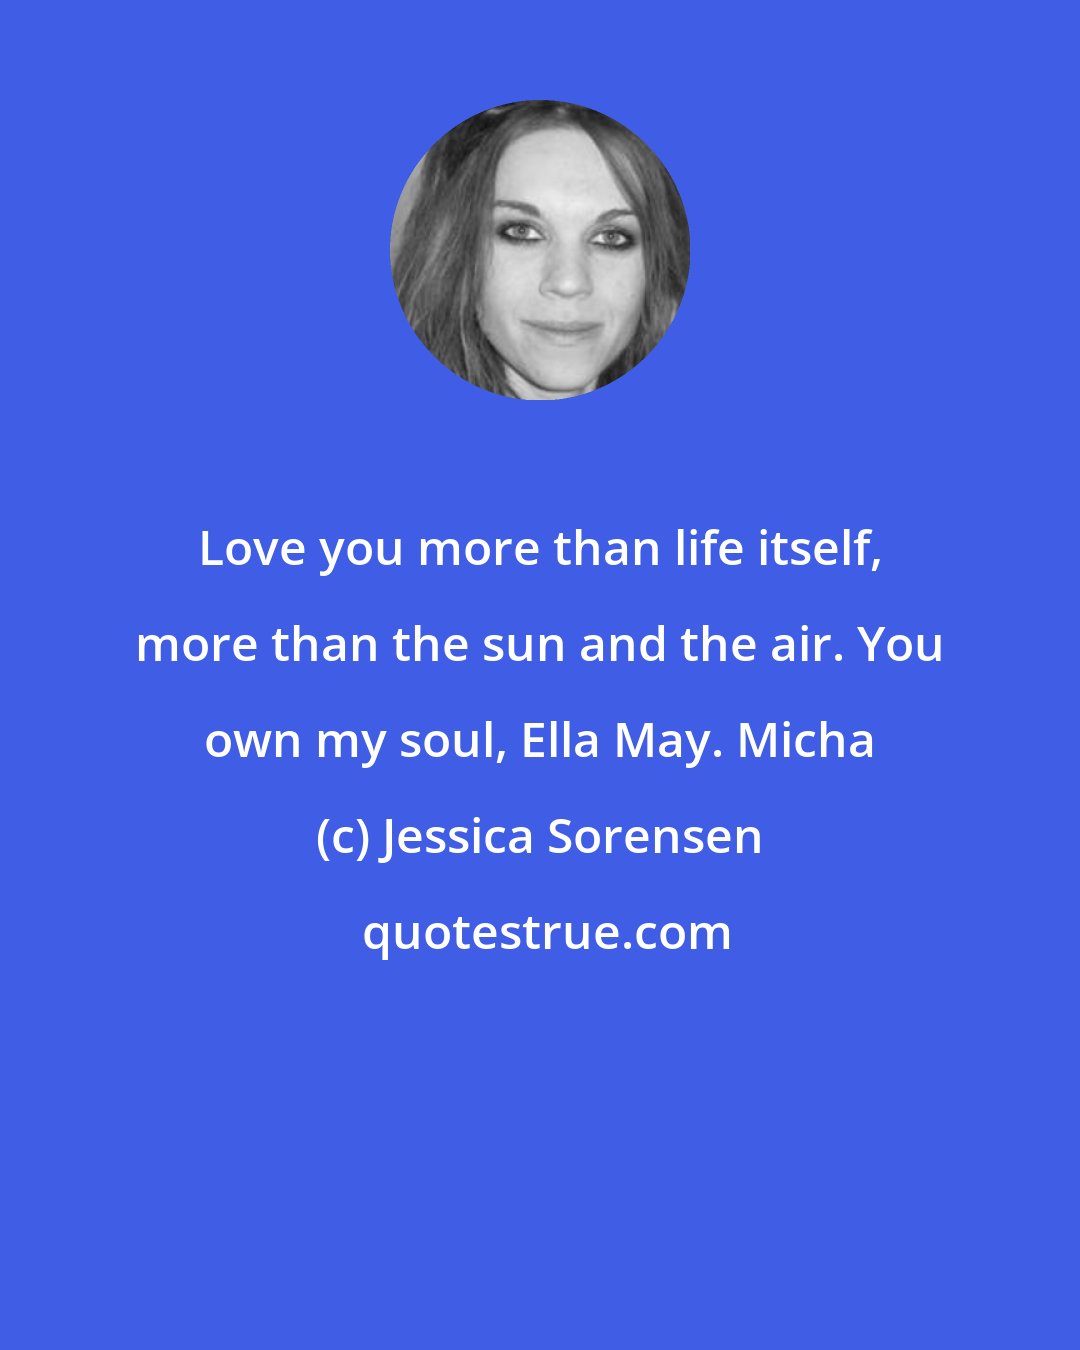 Jessica Sorensen: Love you more than life itself, more than the sun and the air. You own my soul, Ella May. Micha